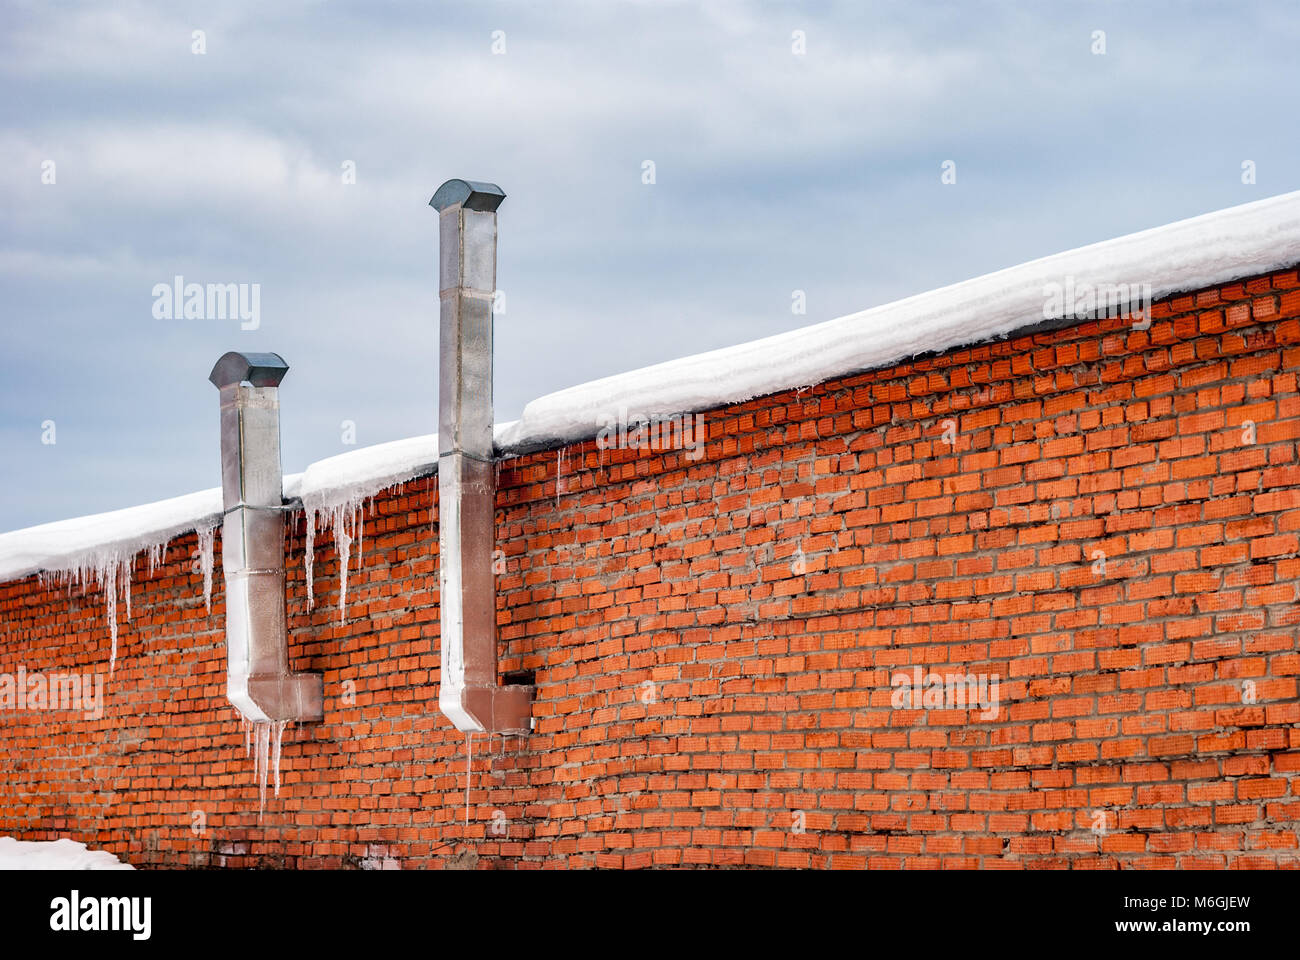 Red brick wall with ventilation pipes atop a concrete fence adorned with icicles, hinting at cold weather conditions Stock Photo